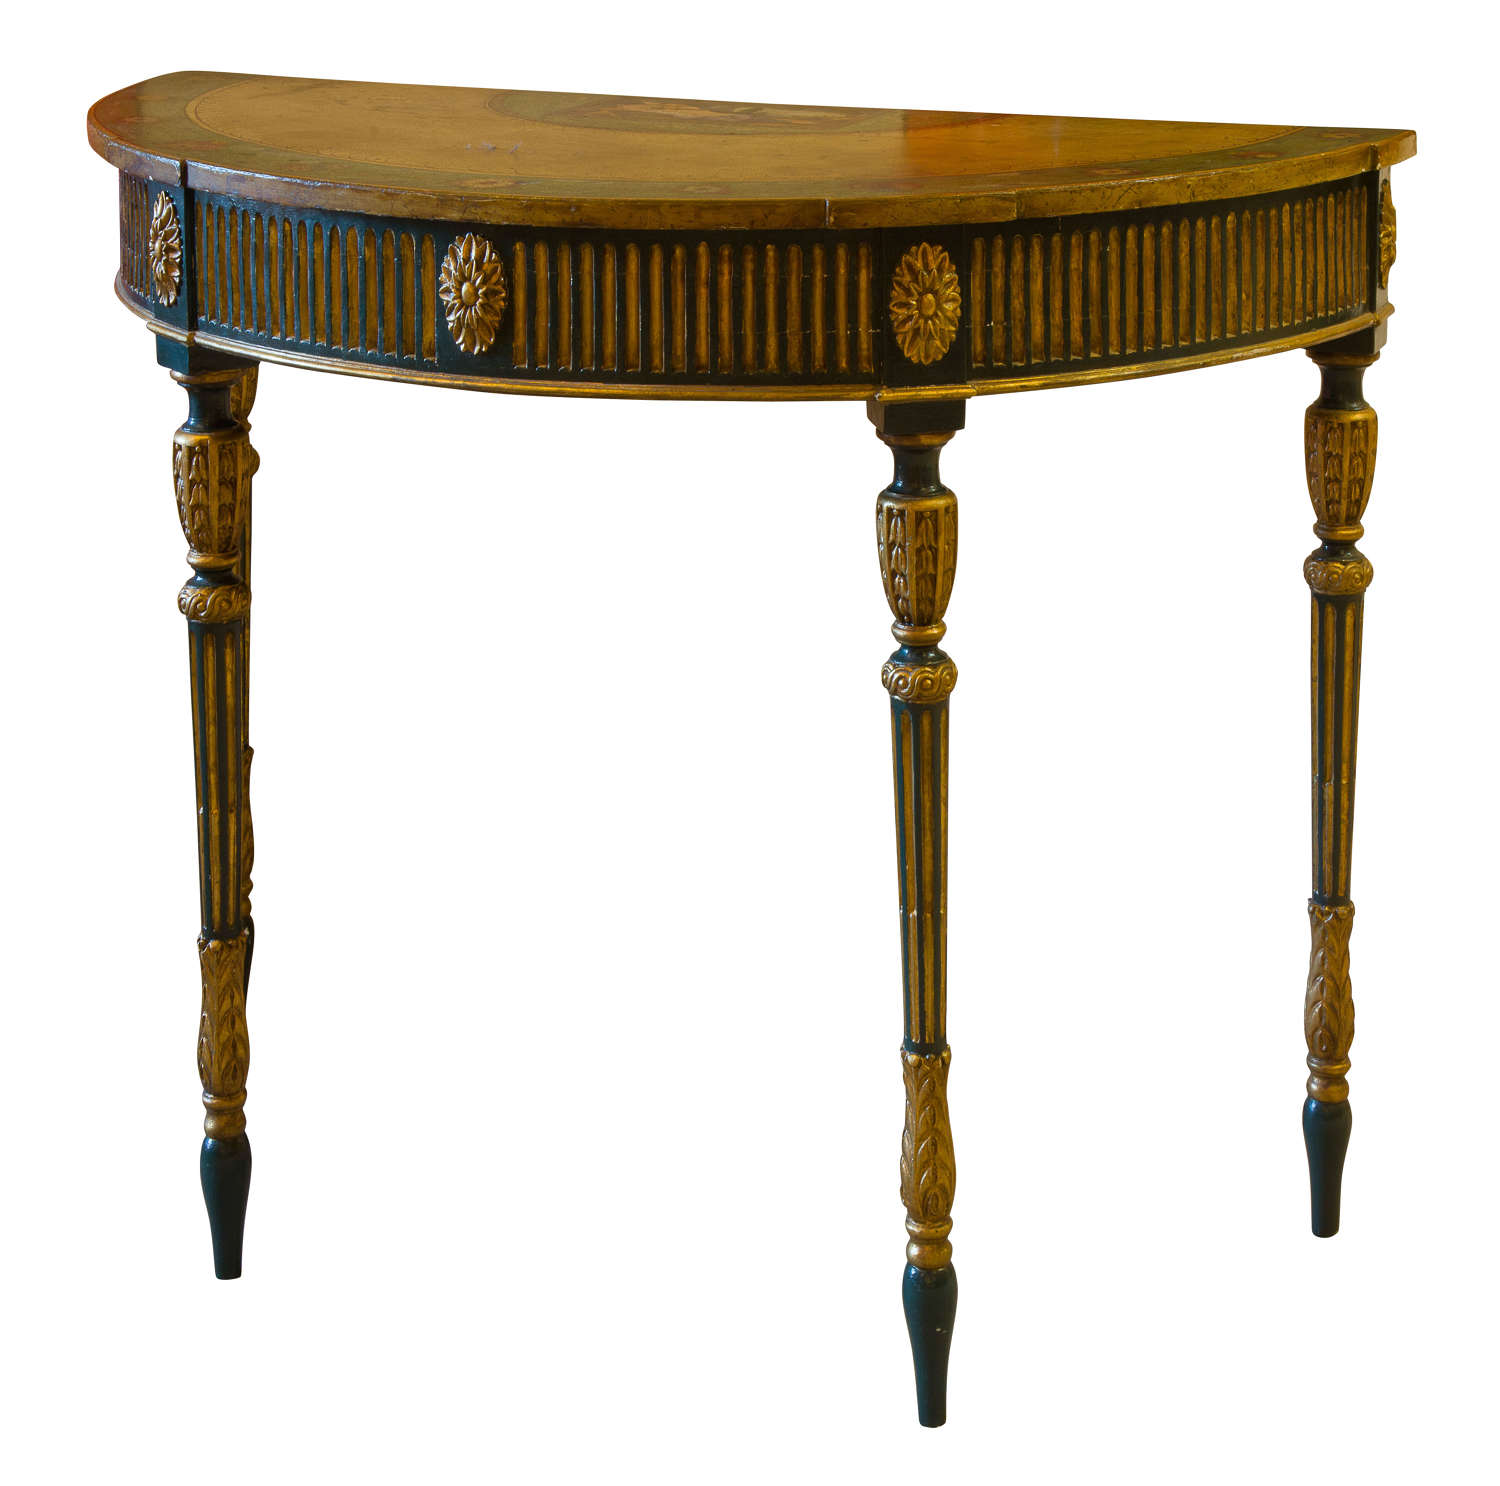 Painted George III style demi lune pier table c1880